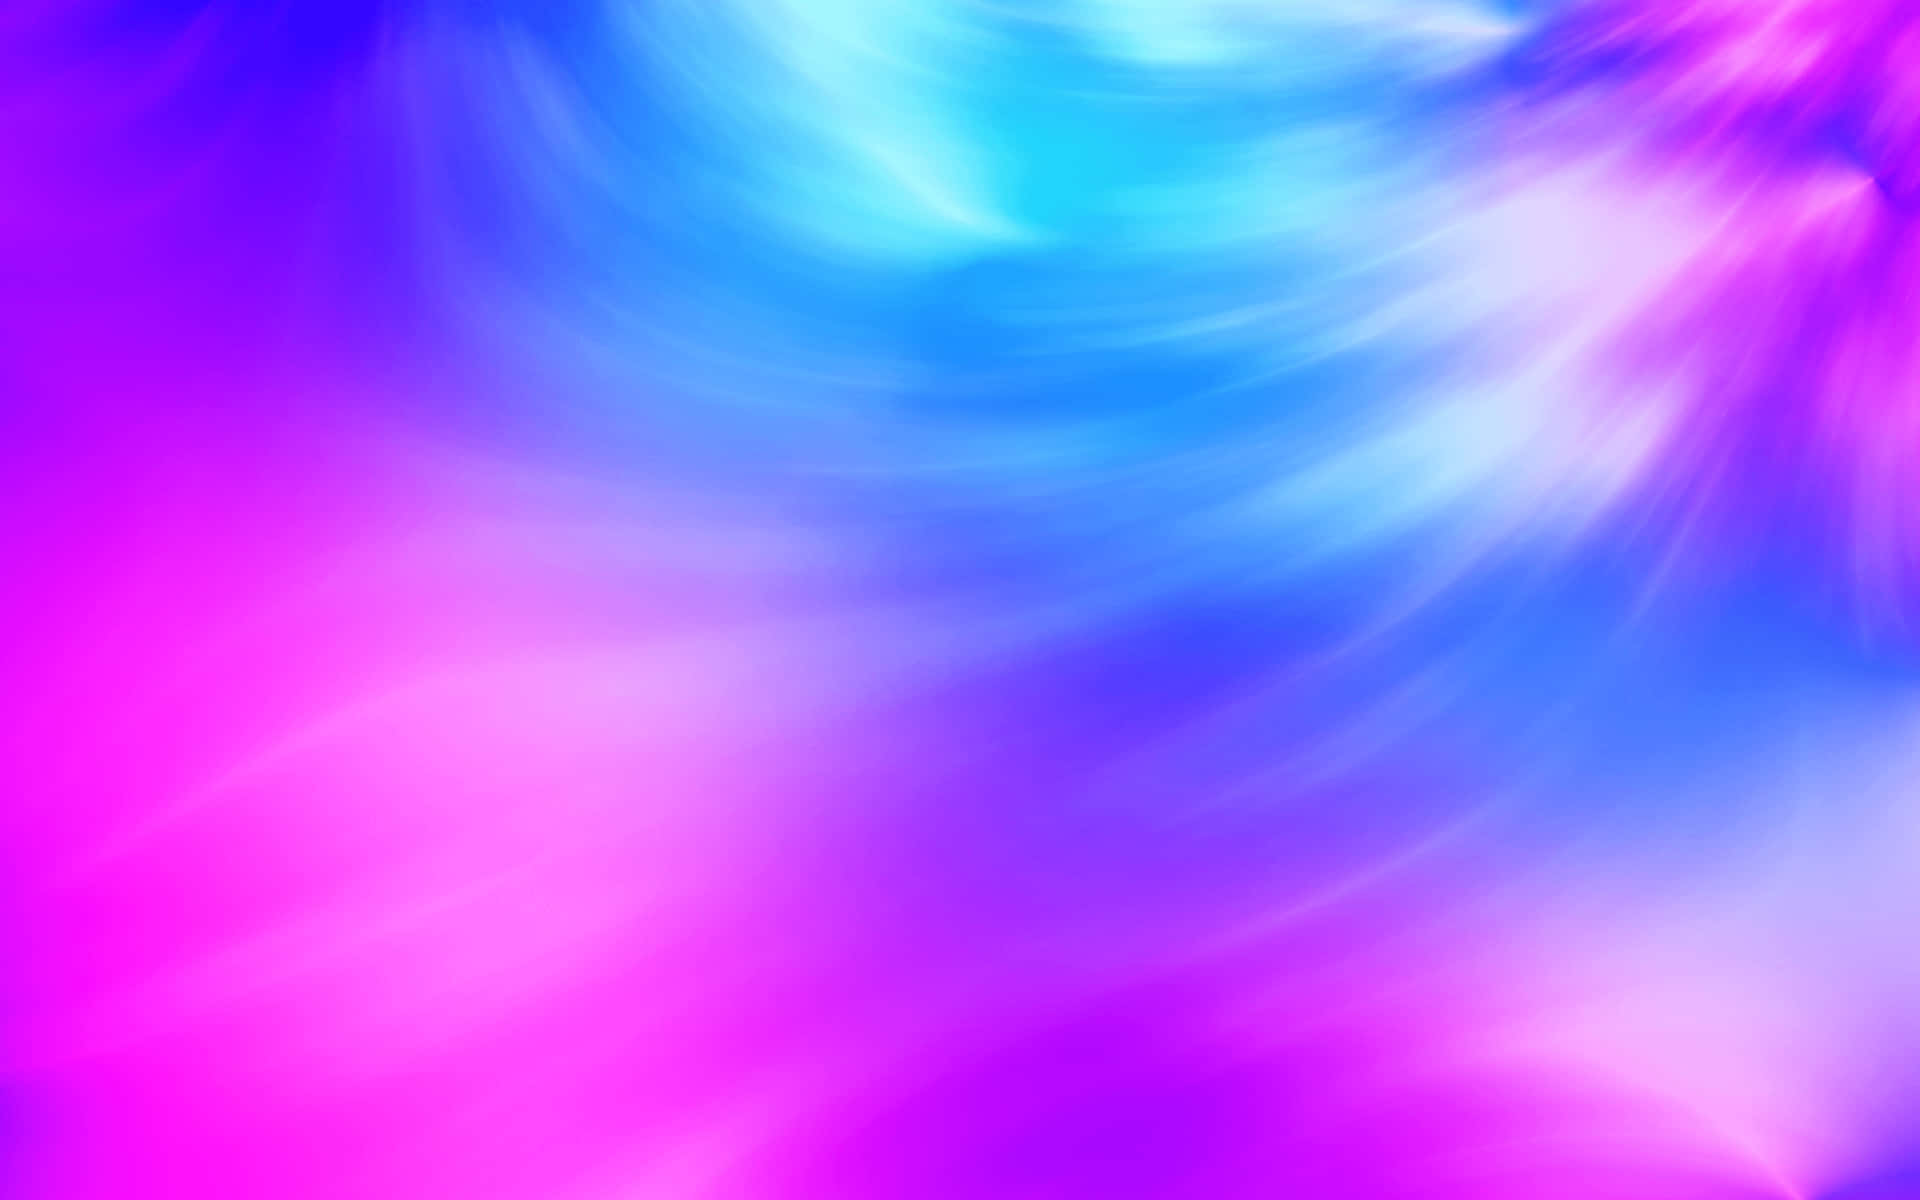 Blue And Pink Blurred Abstract Gradient Background